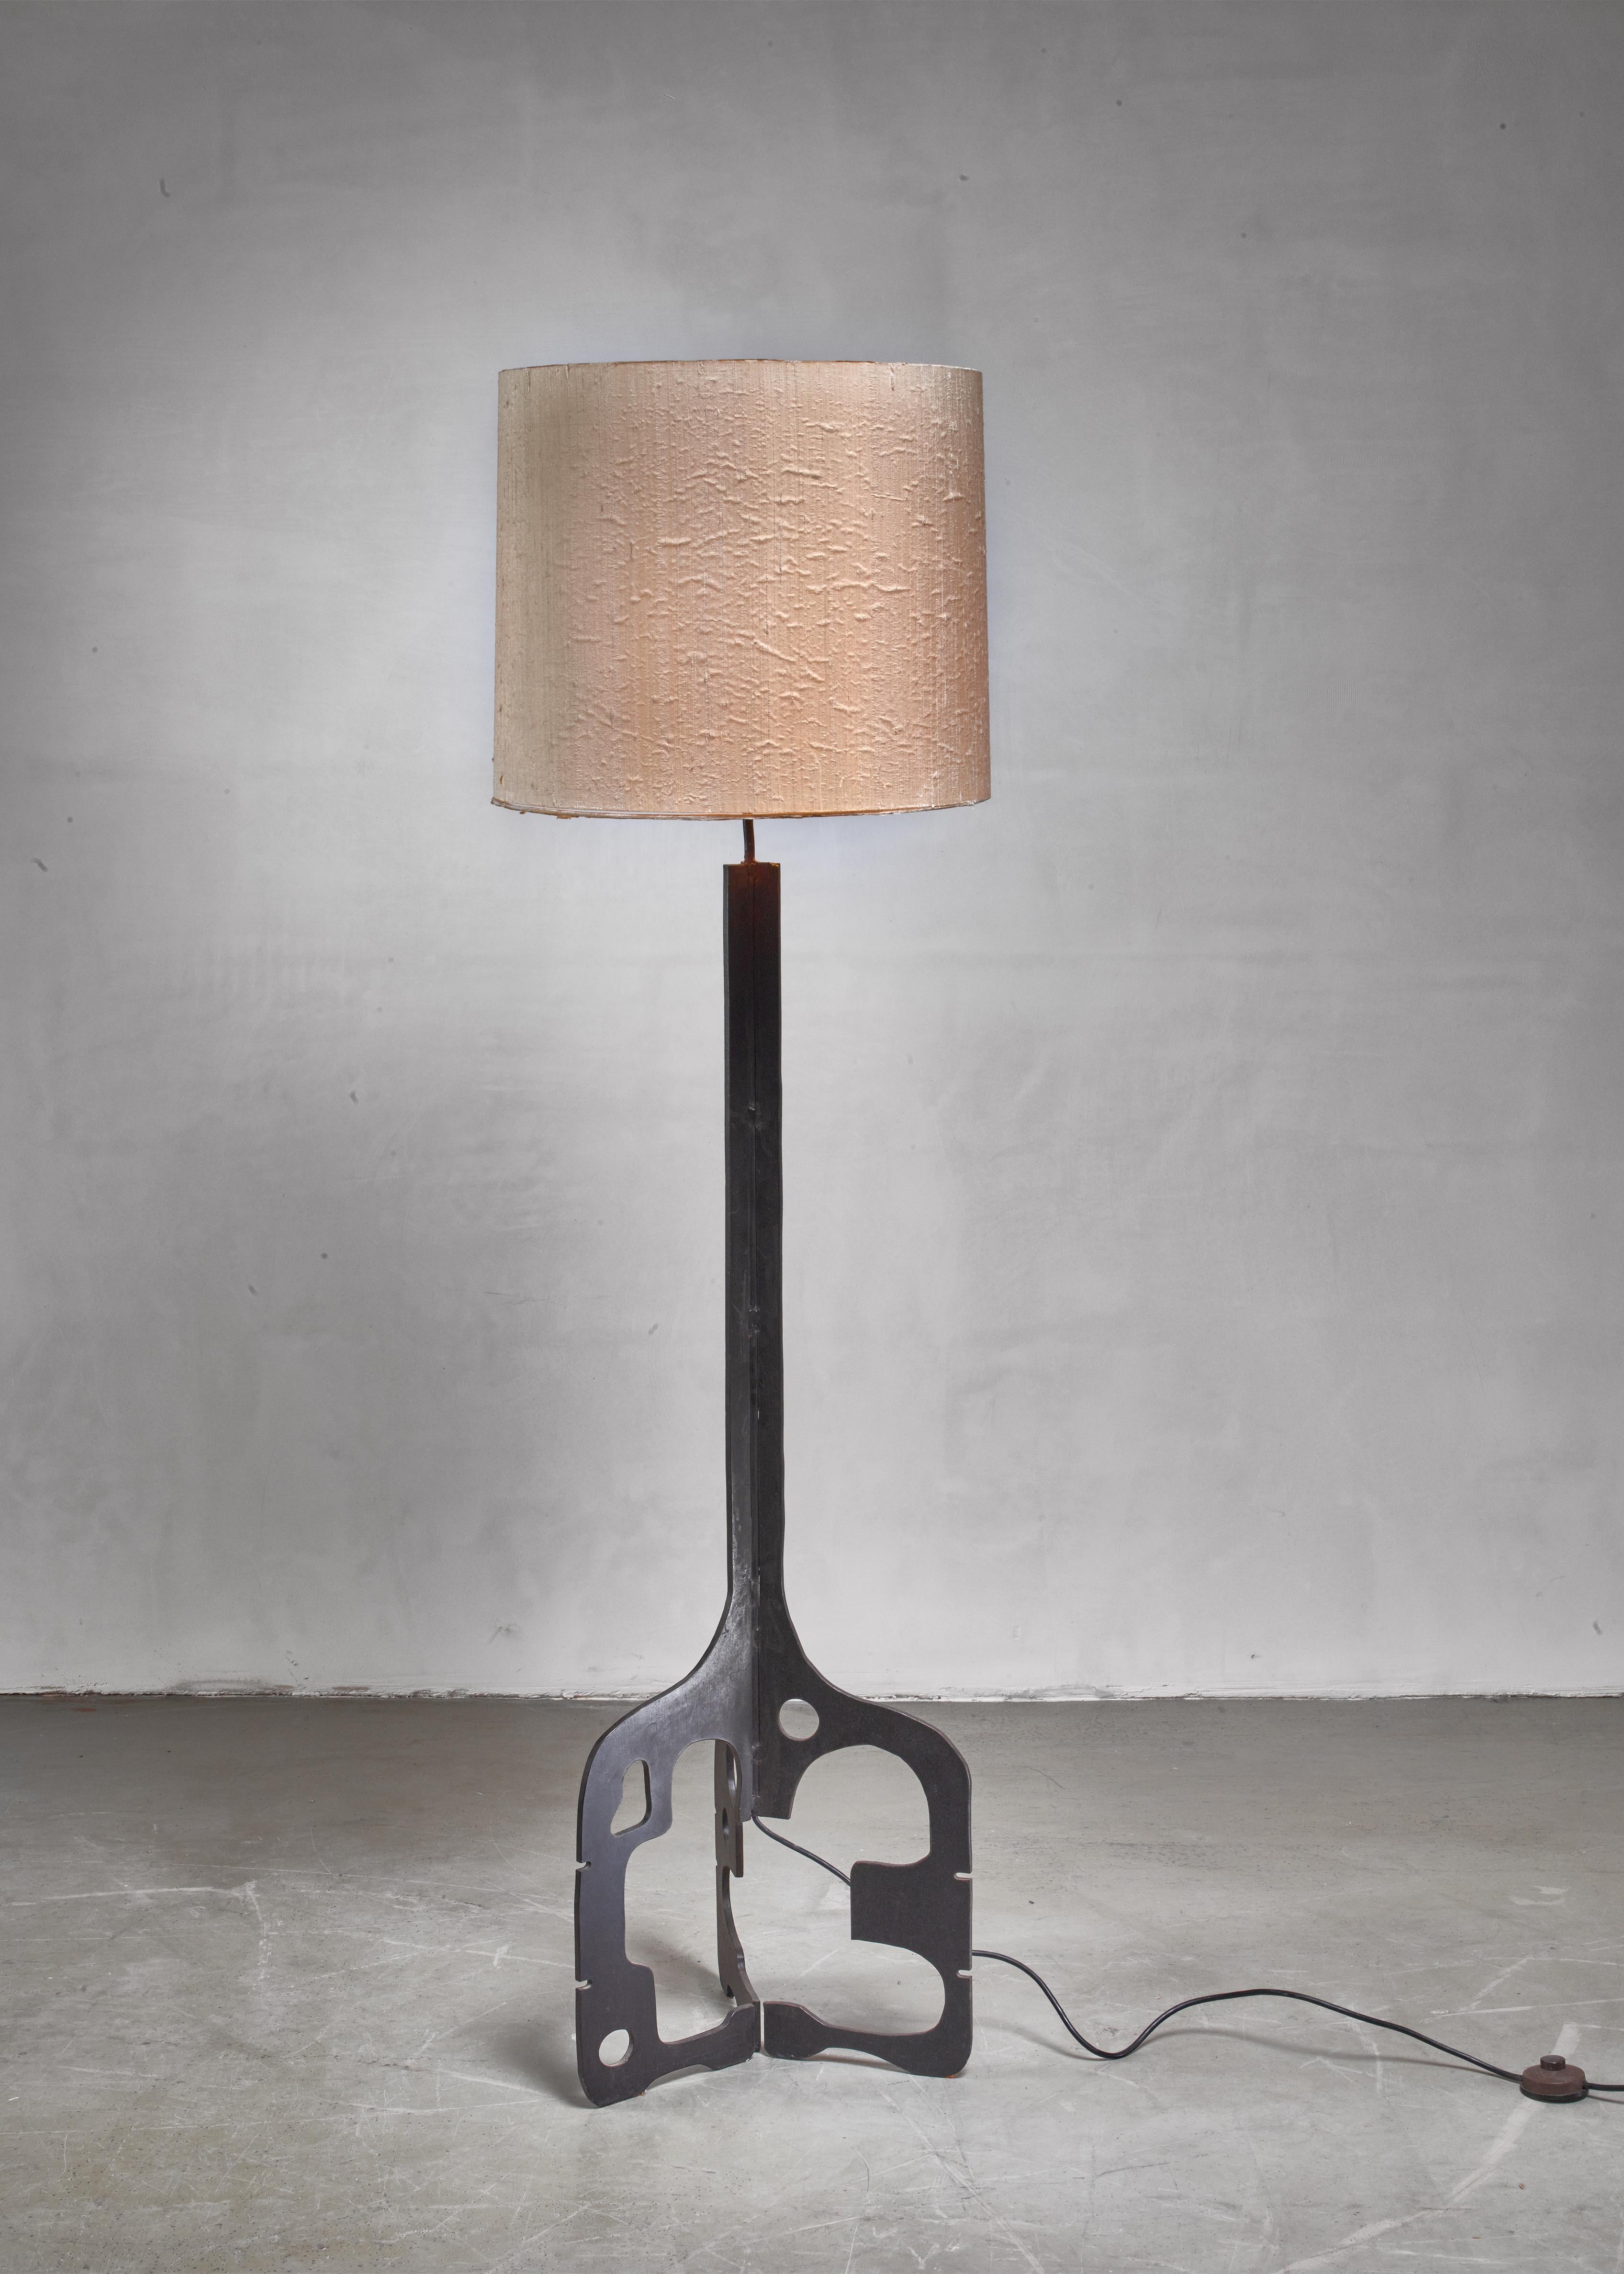 A 1950s German black iron floor lamp on a sculptural triform base.
The measurements and price stated are of the lamp without a shade.
Shade available on request.

 
 